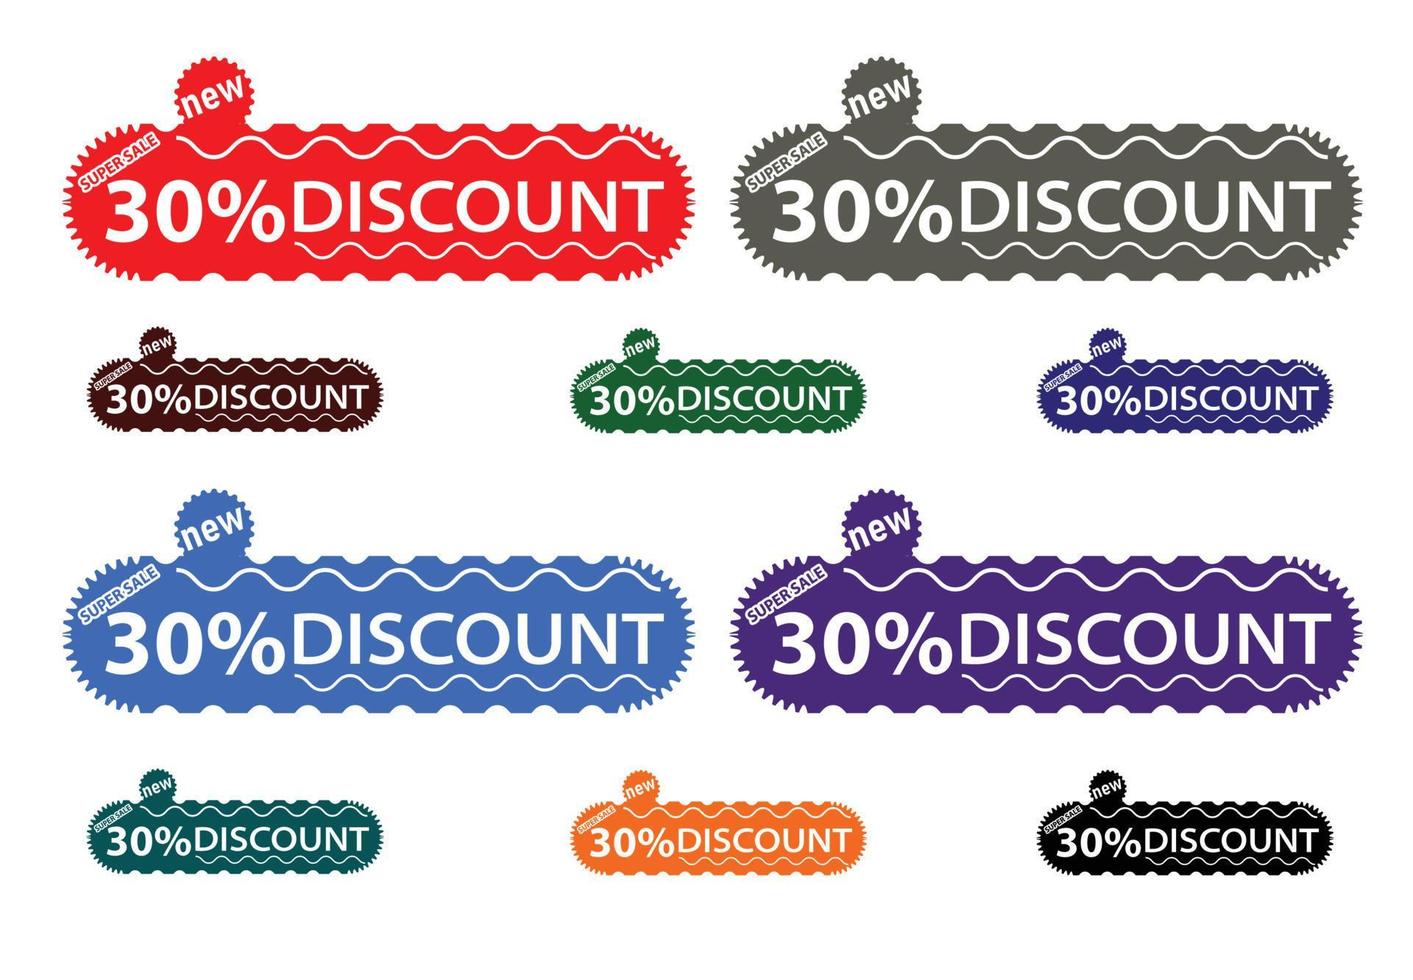 30 percent off new offer logo and icon design template vector